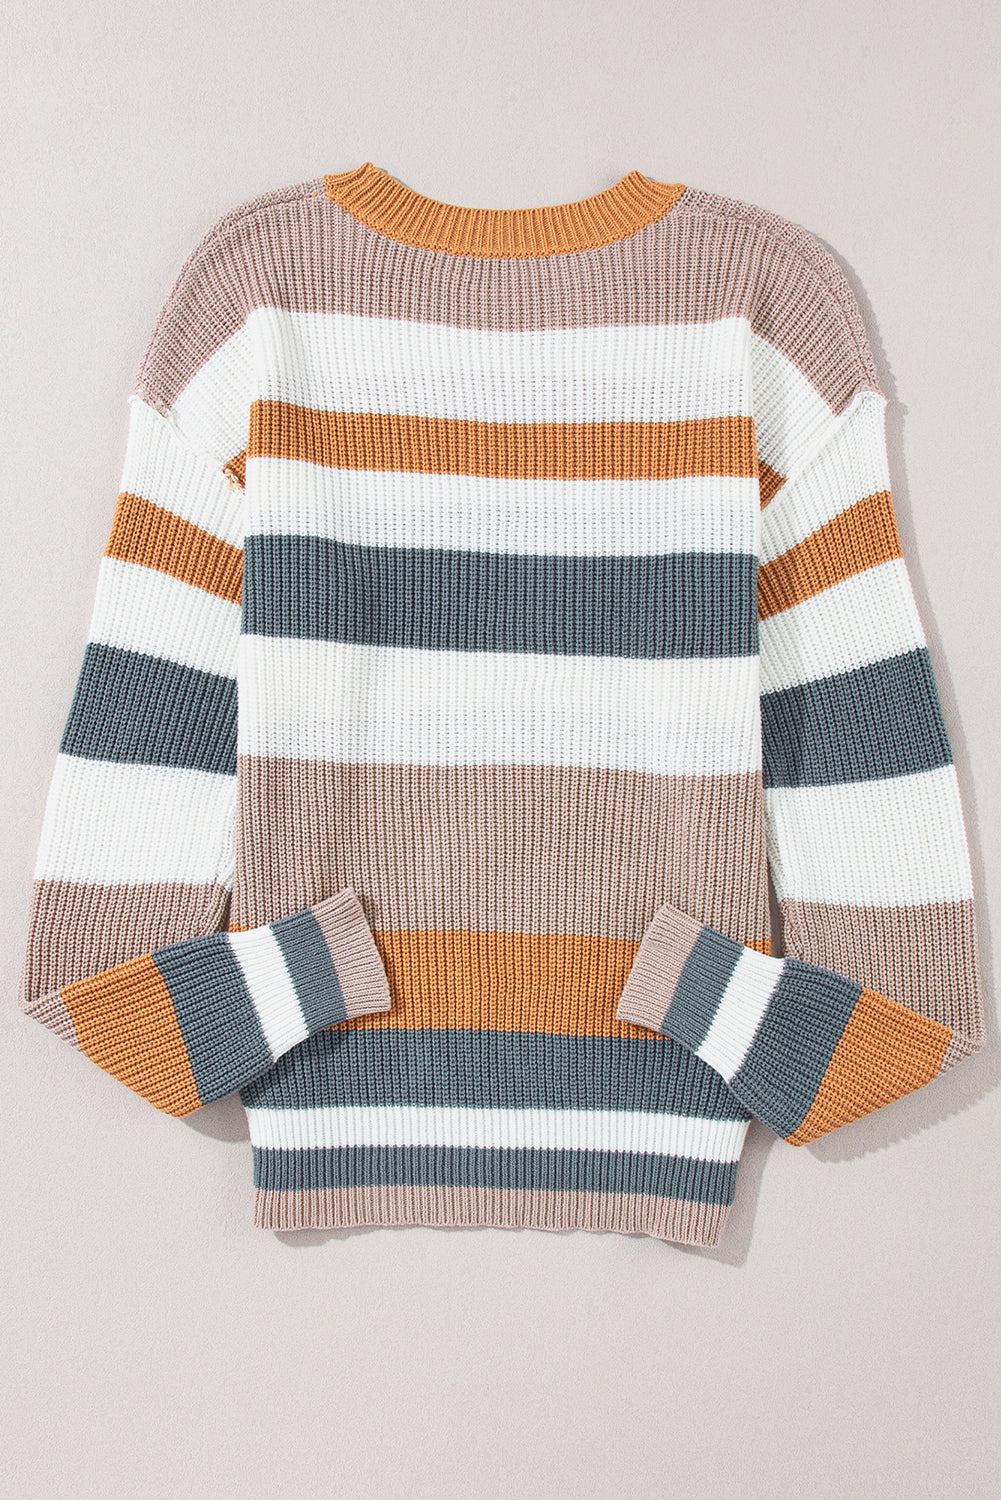 Camel Classic Round Neck Colorblock Knit Sweater